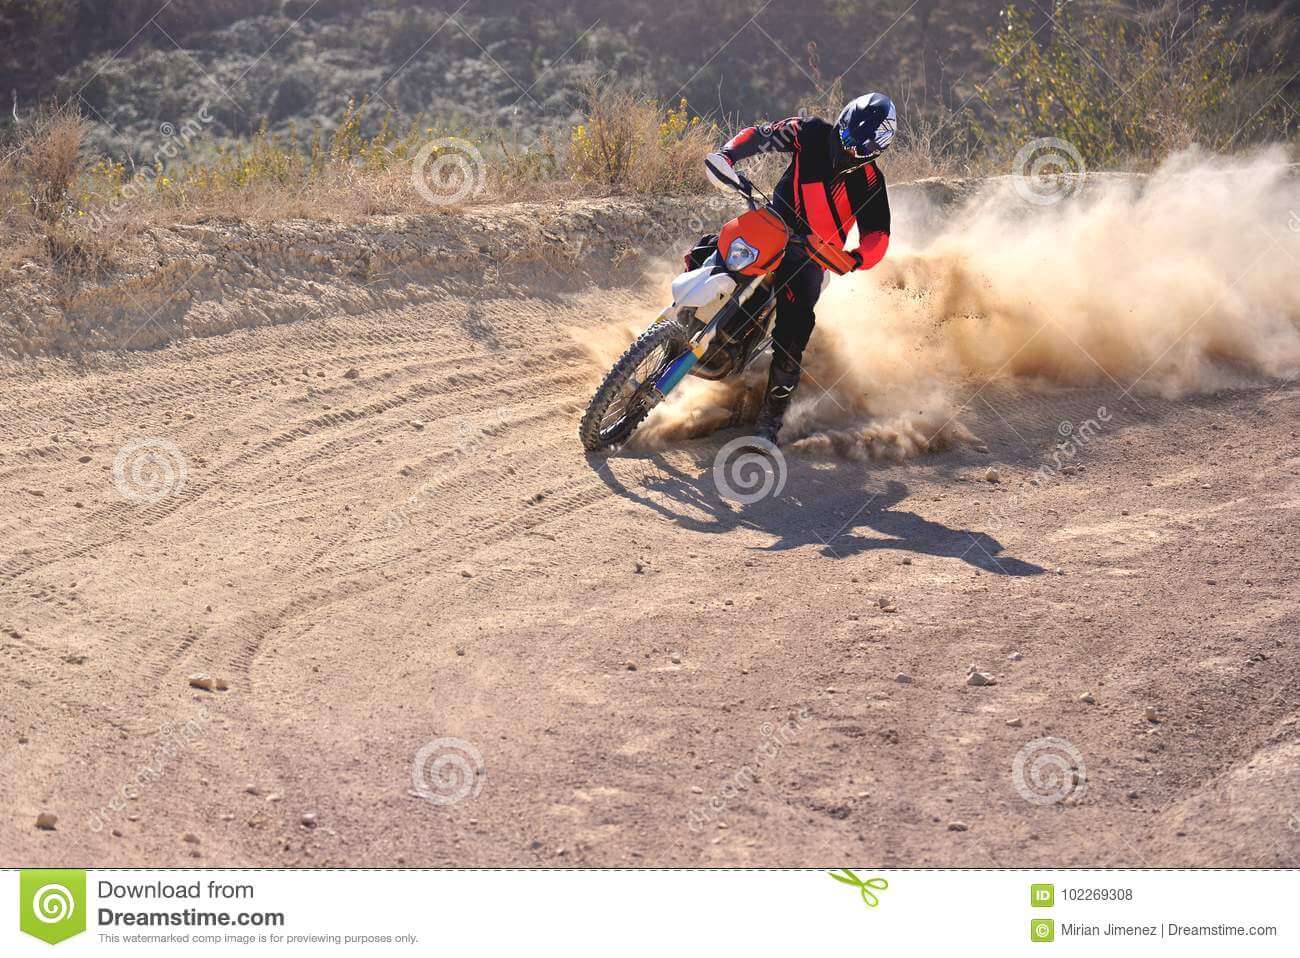 How To Stop A Dirt Bike